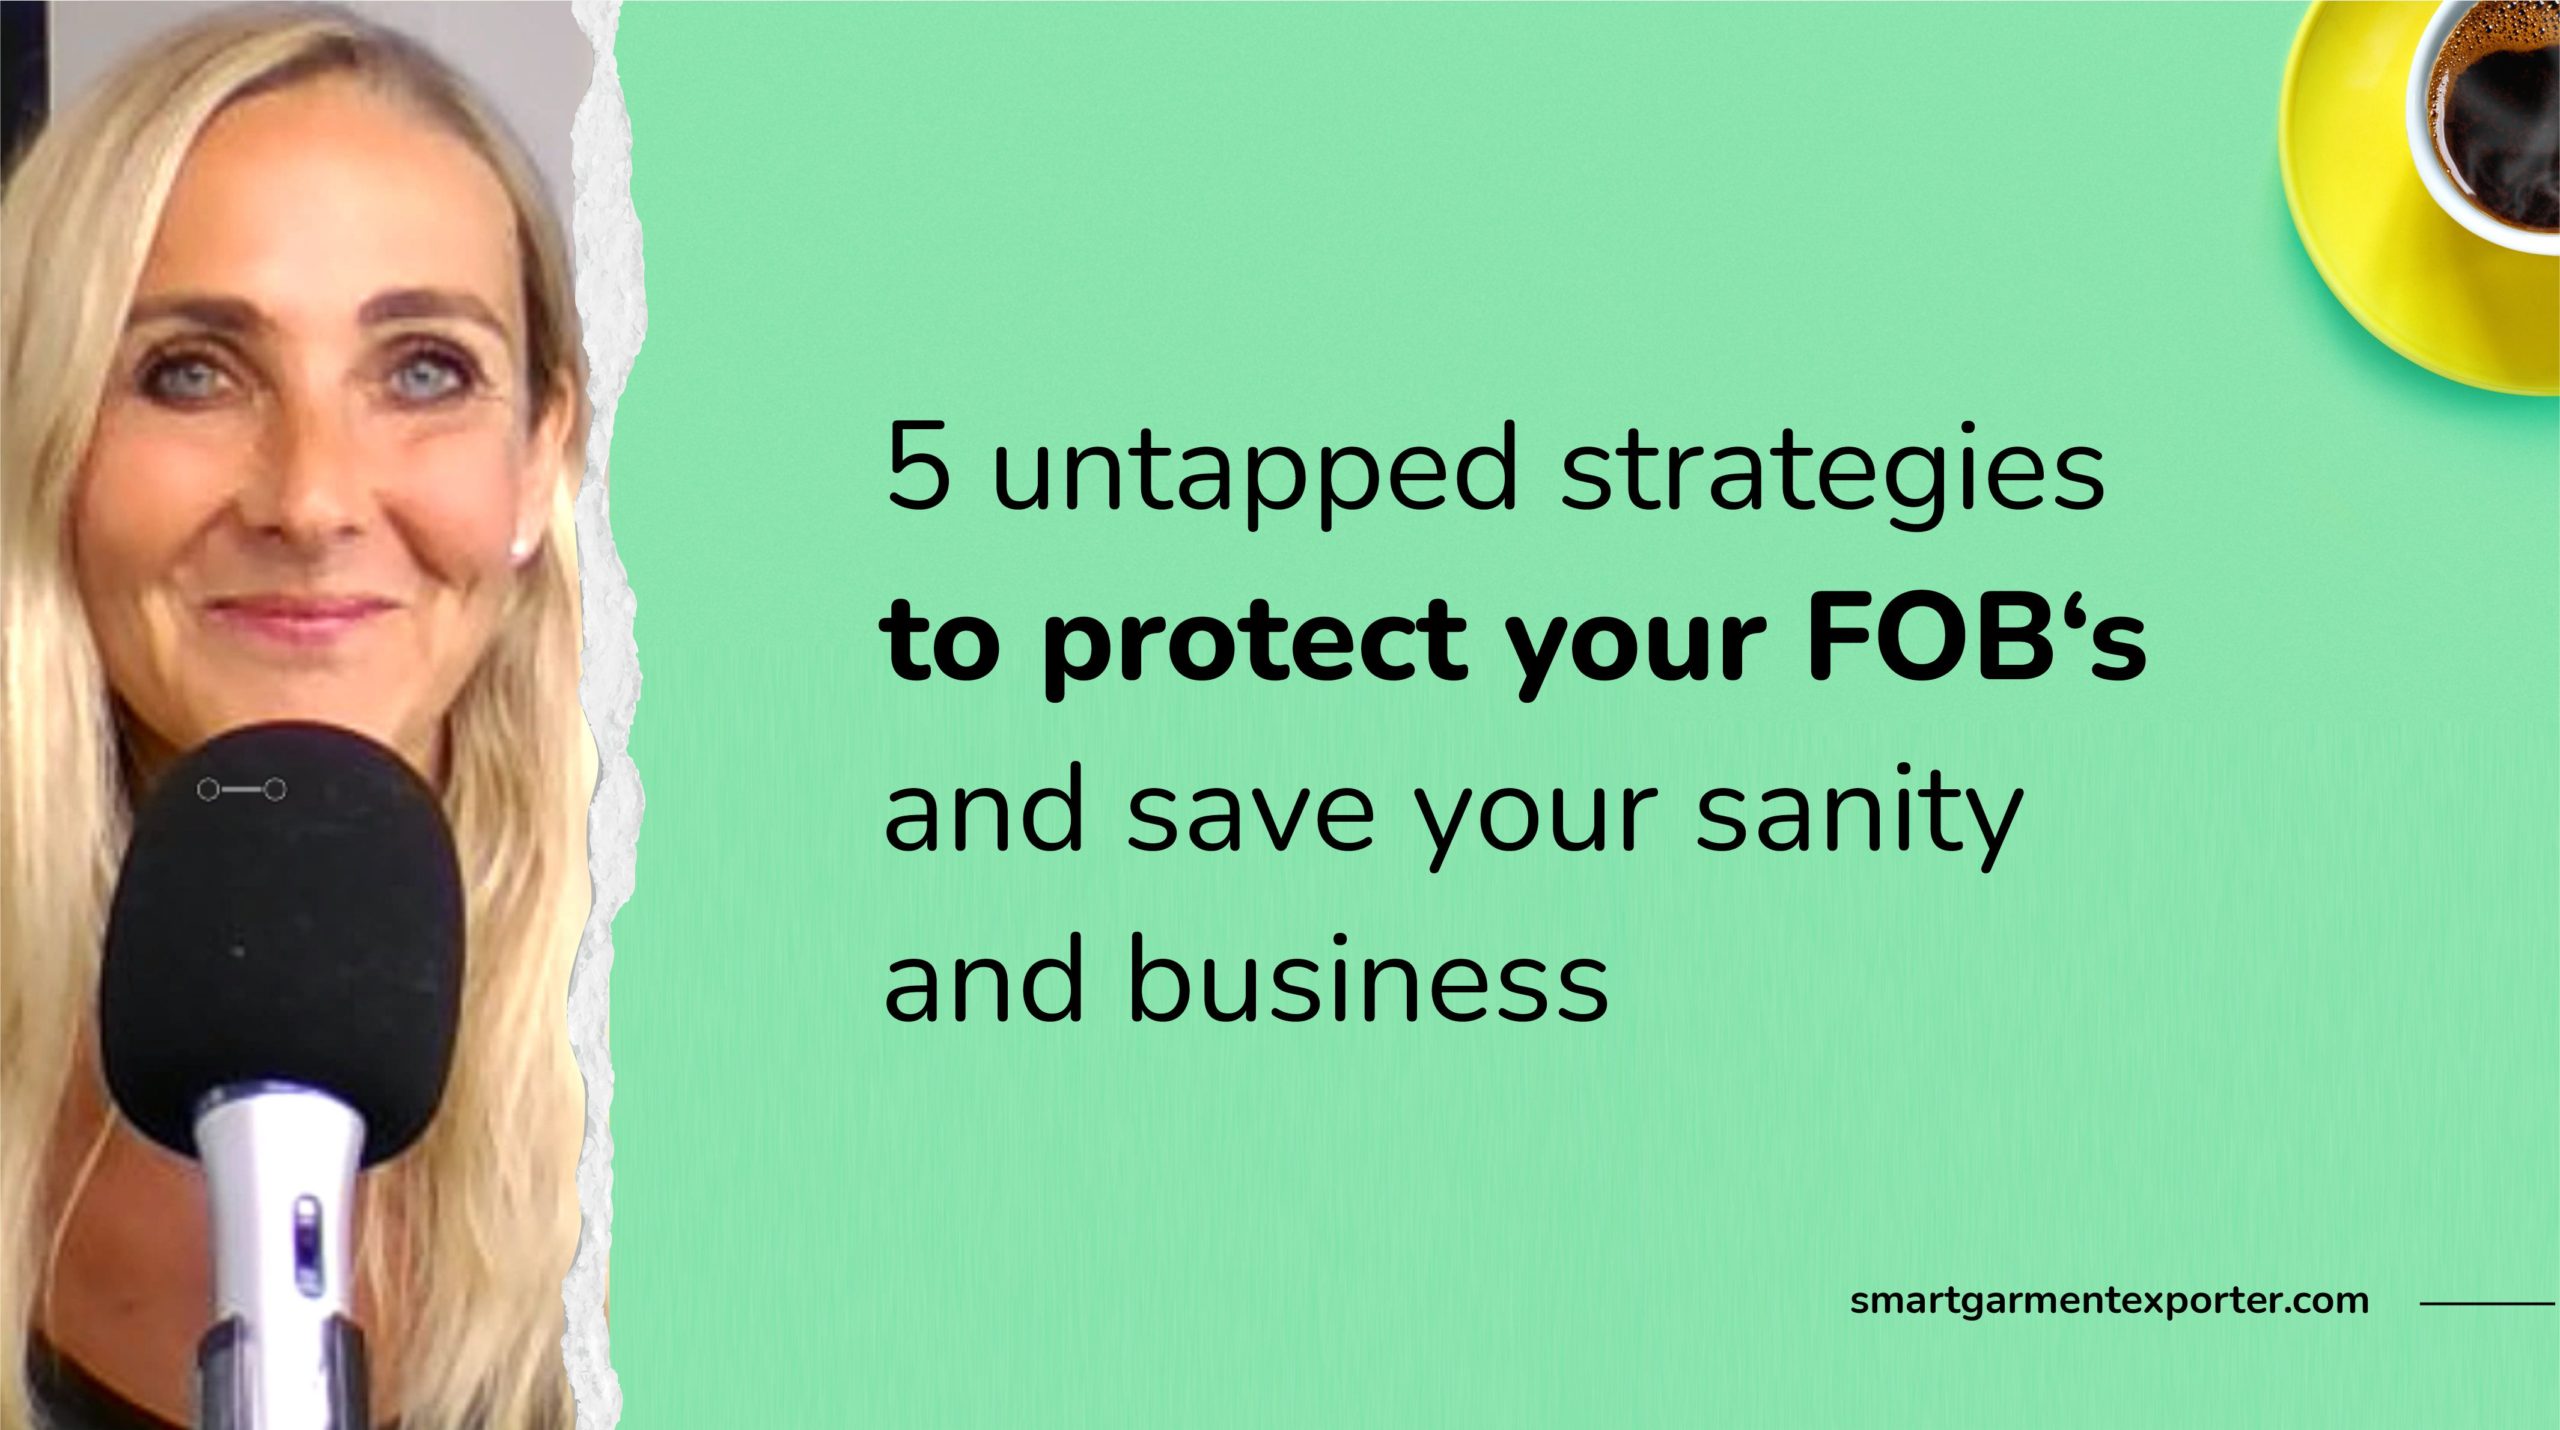 5 untapped strategies to protect your fob’s and save your sanity and business